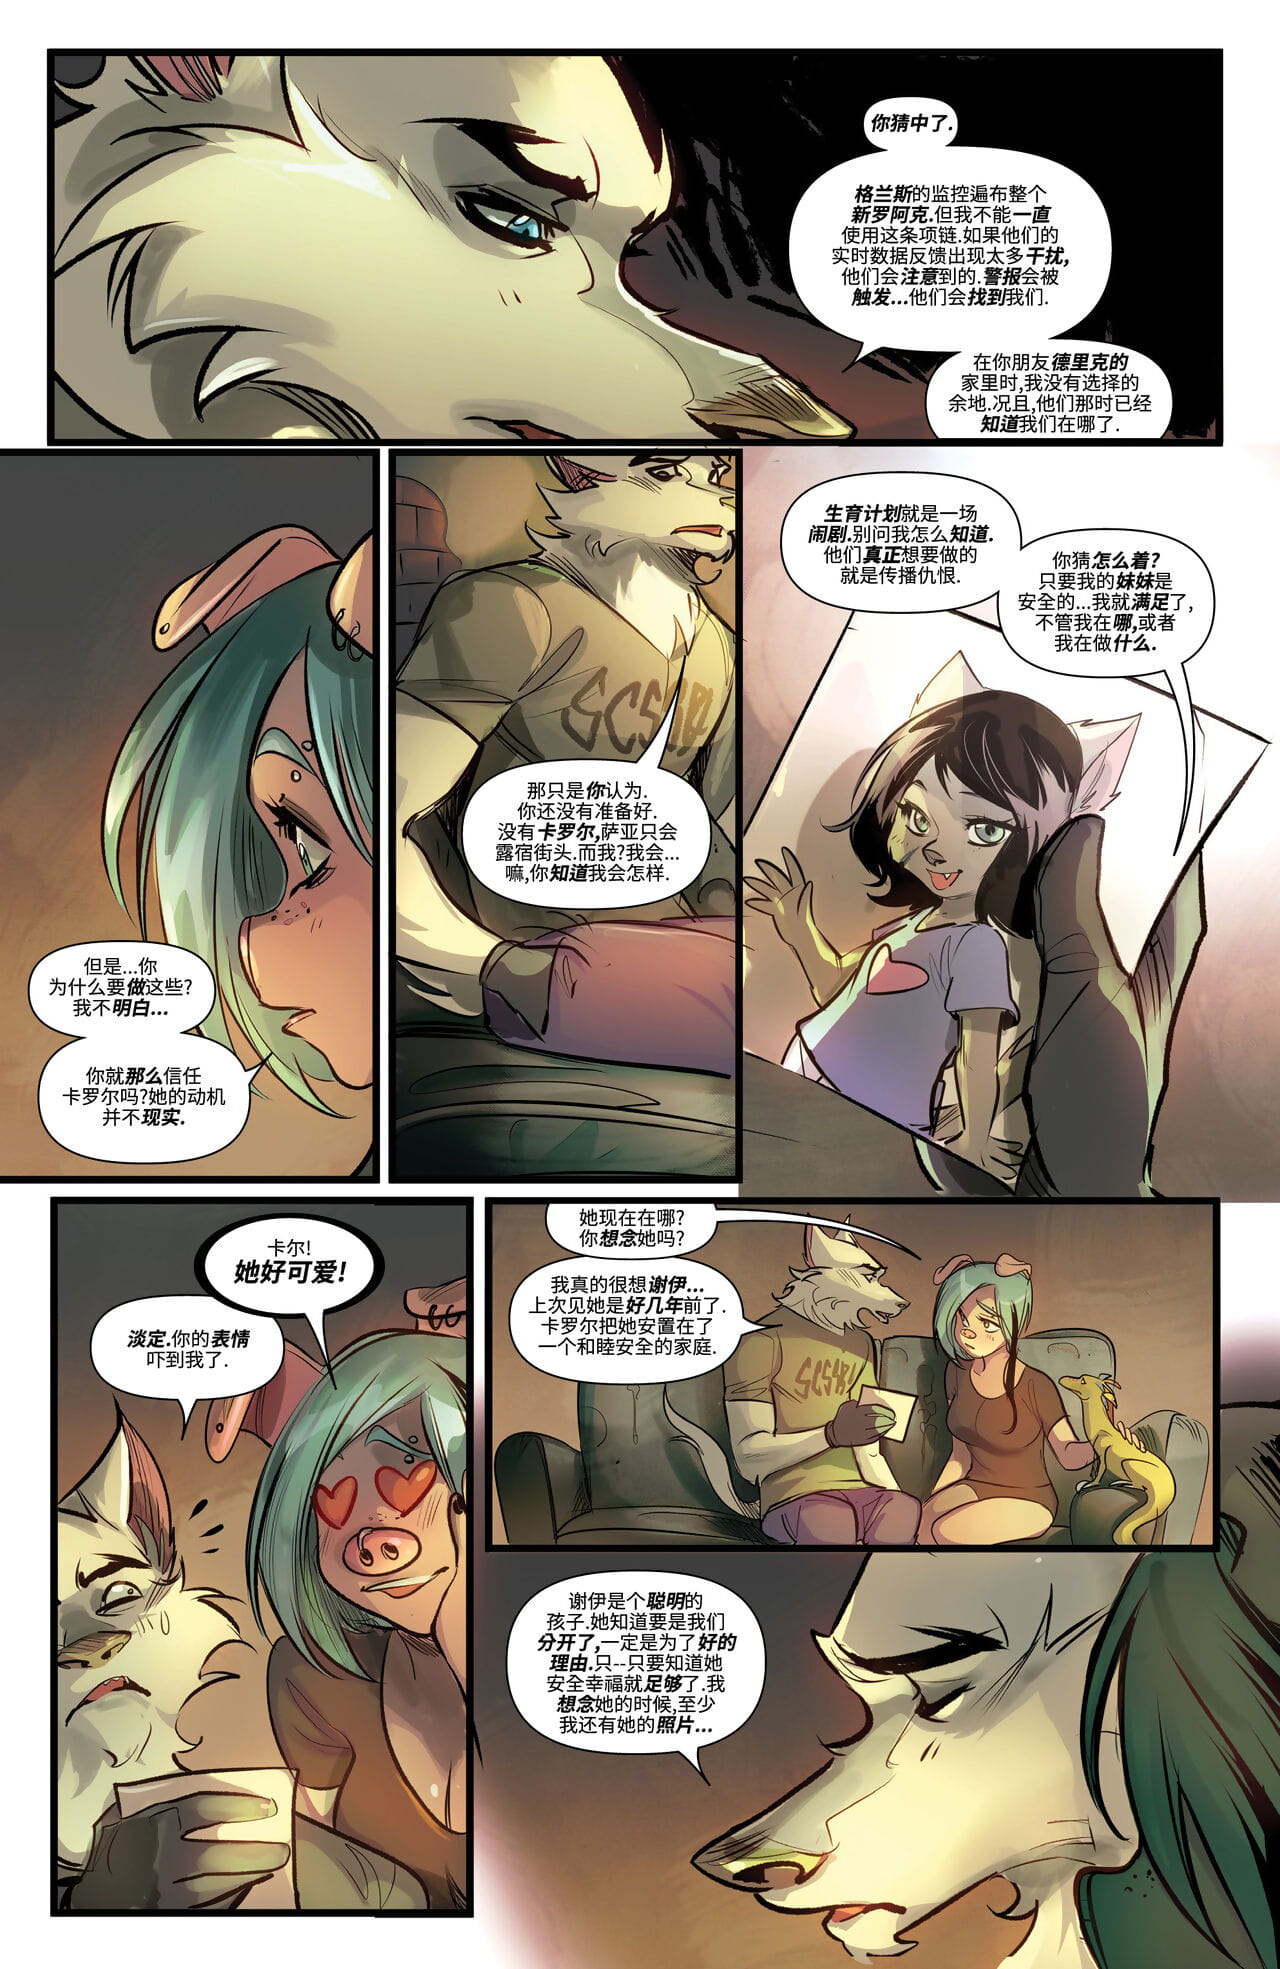 Unnatural - 反自然 - Issue 7 page 1